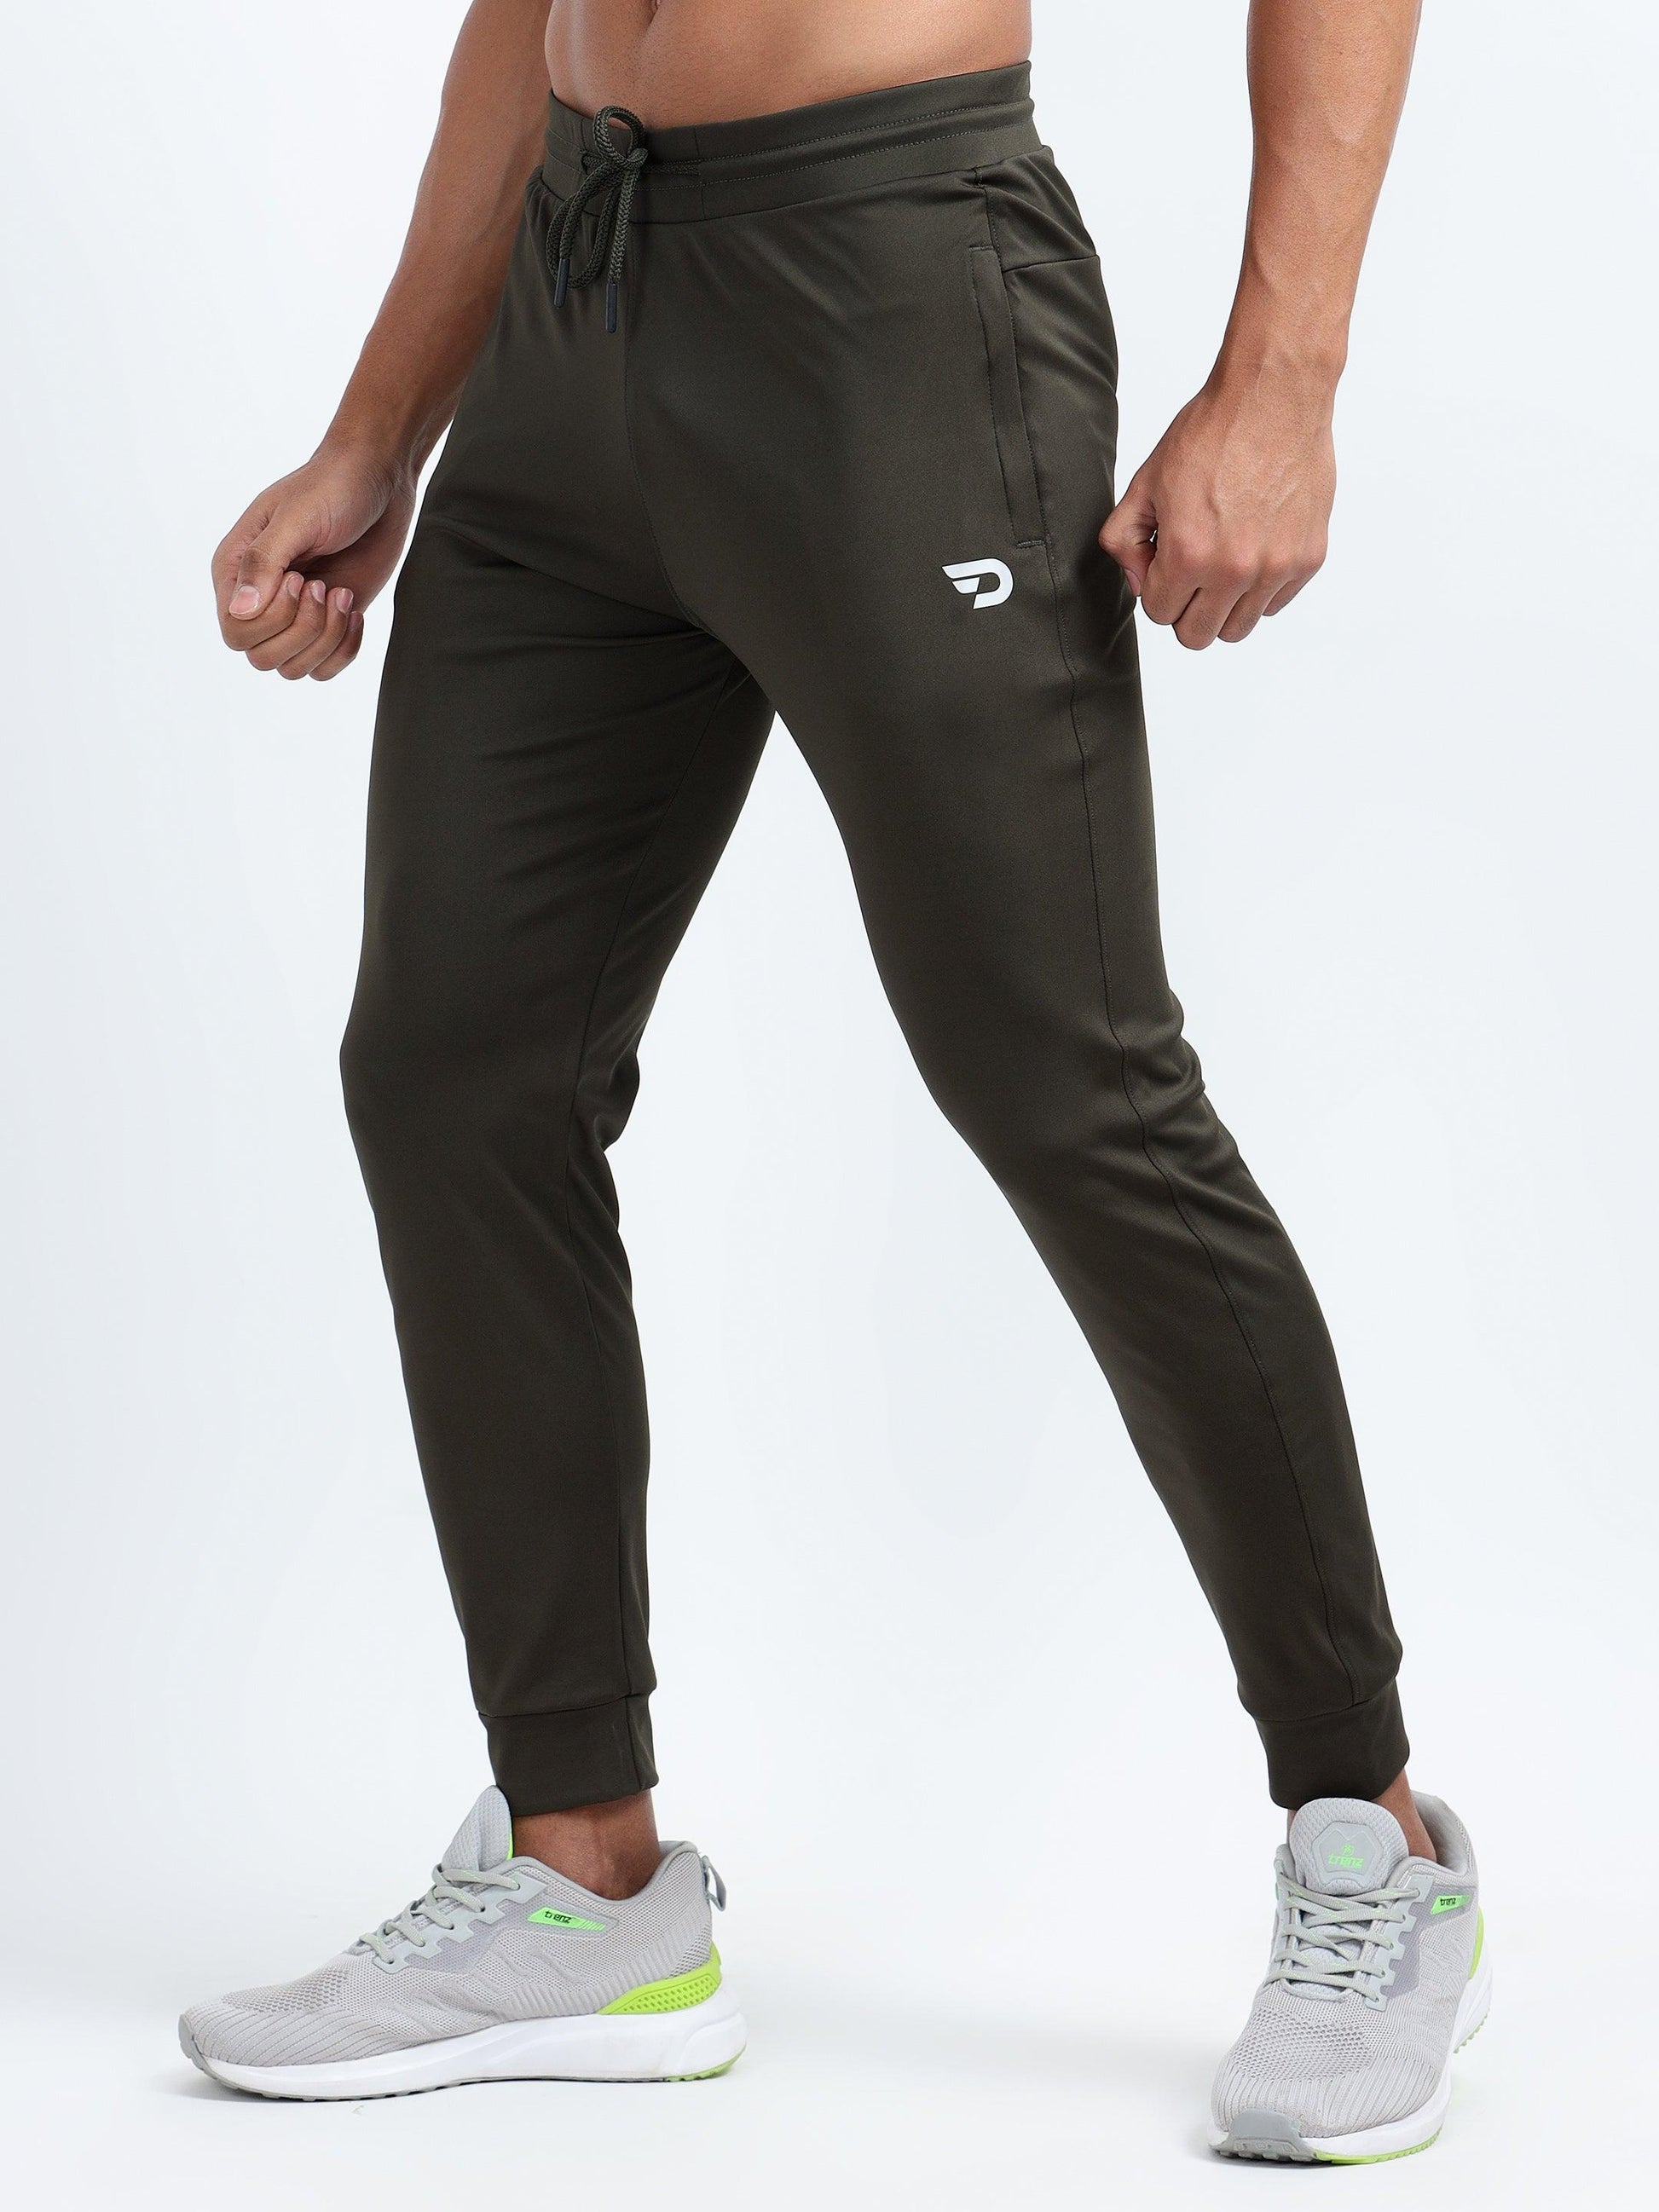 Denmonk: Elevate your look with these Power joggers sharp core olive joggers for mens.